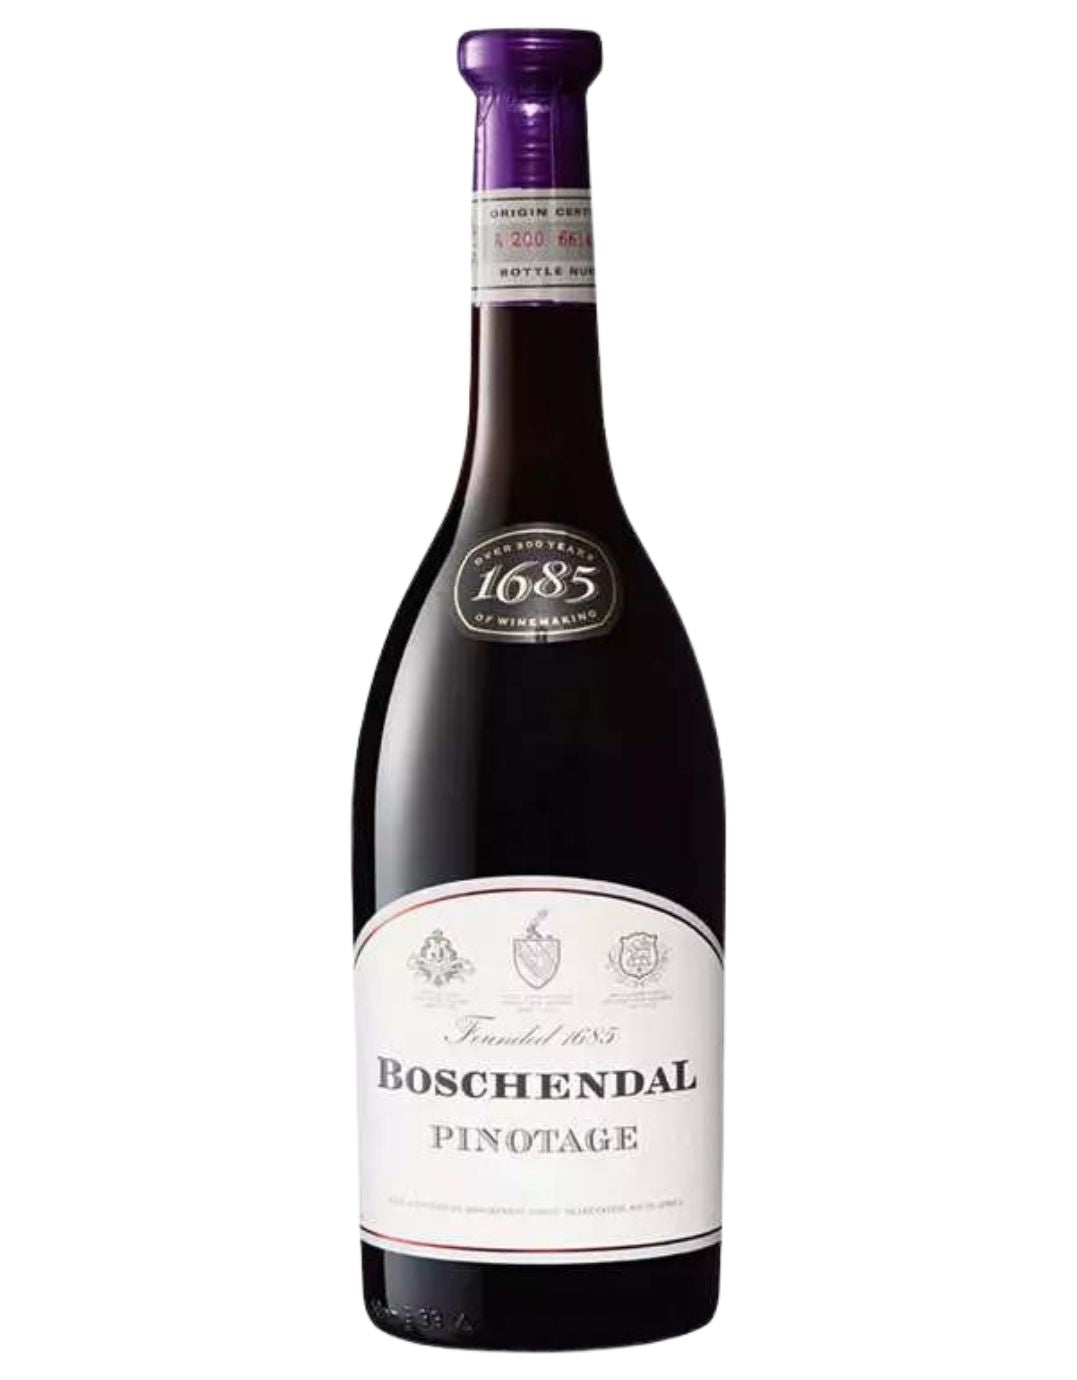 Buy Boschendal 1685 Pinotage 2019 online now - The WineStore